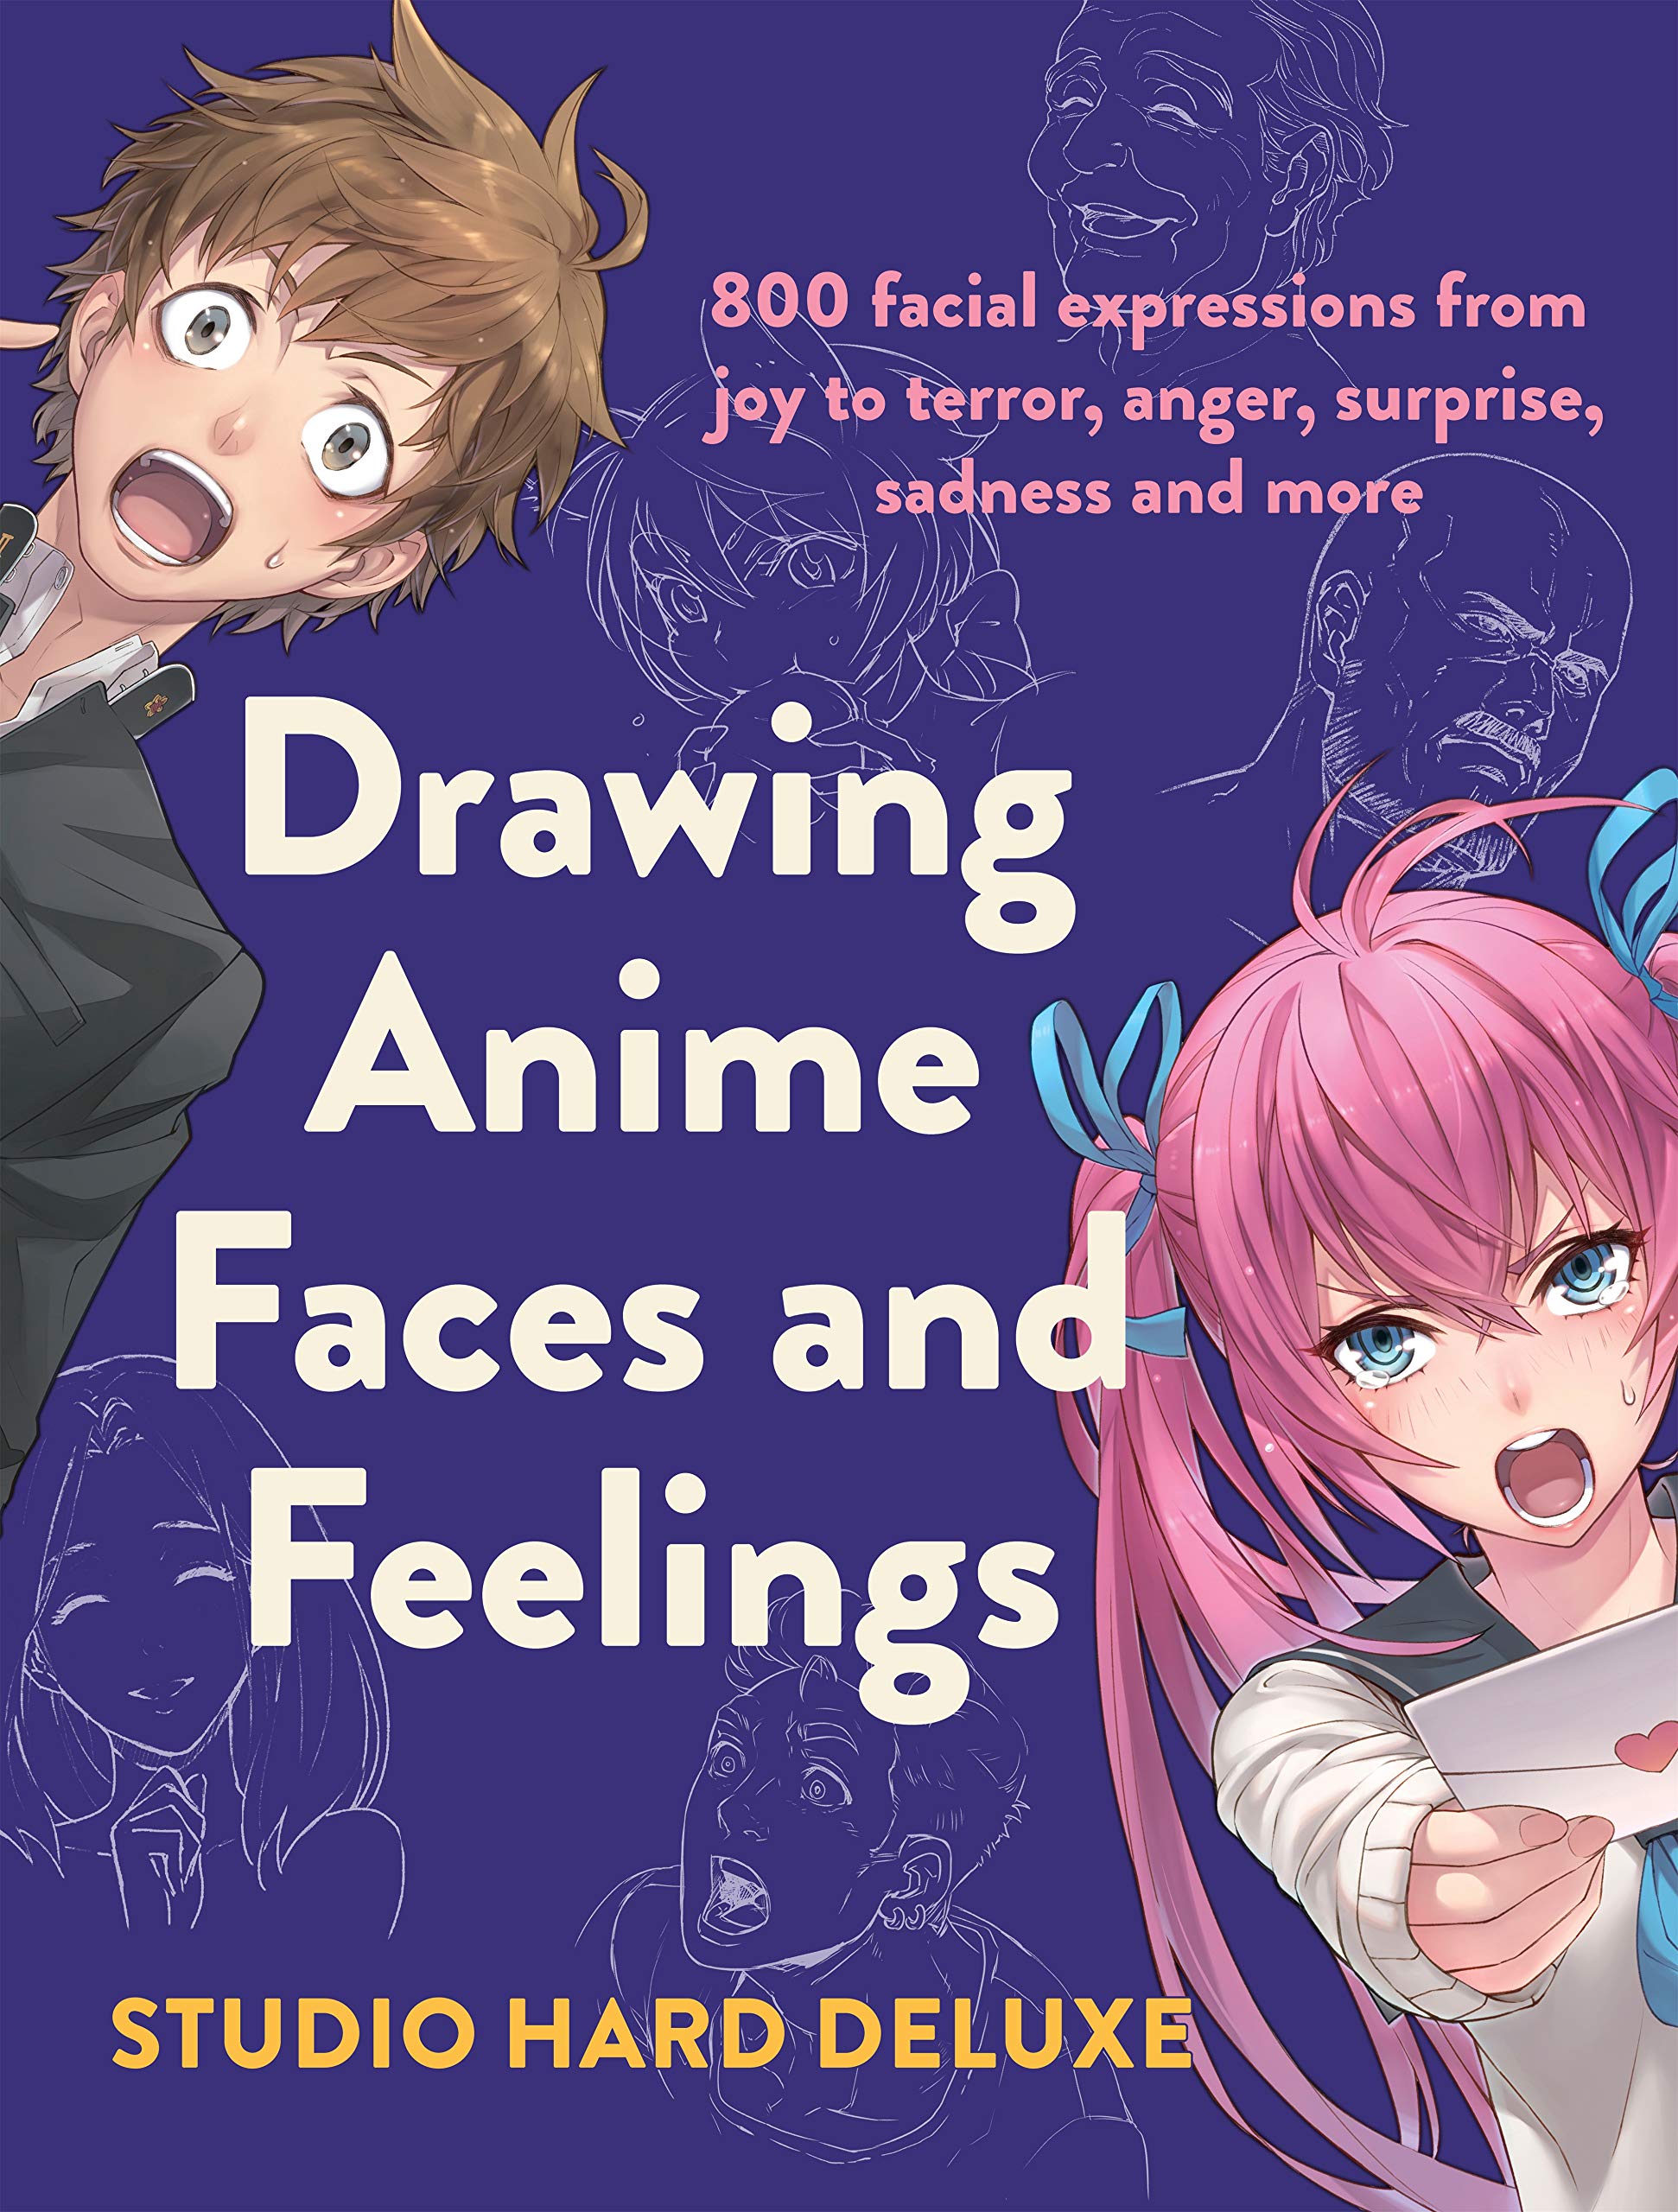 Draw Anime Faces and Feelings |